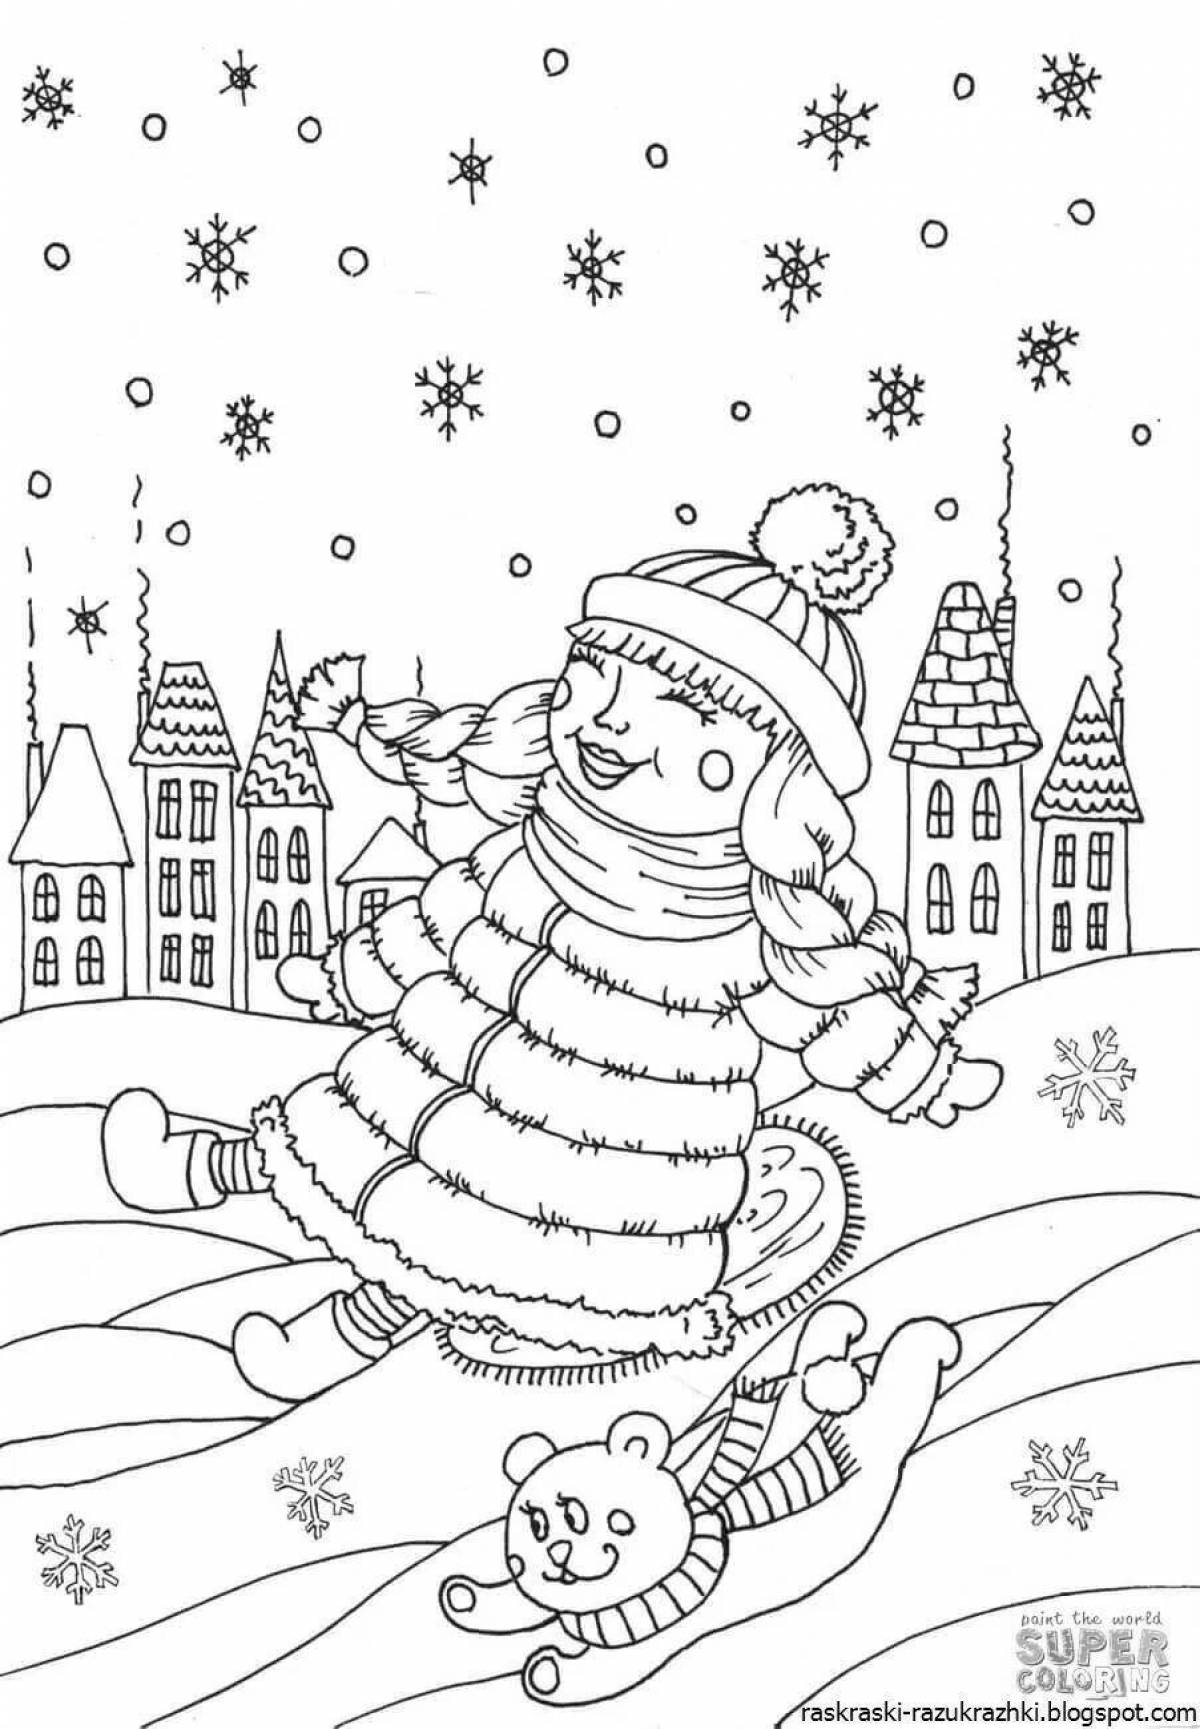 Dazzling february coloring book